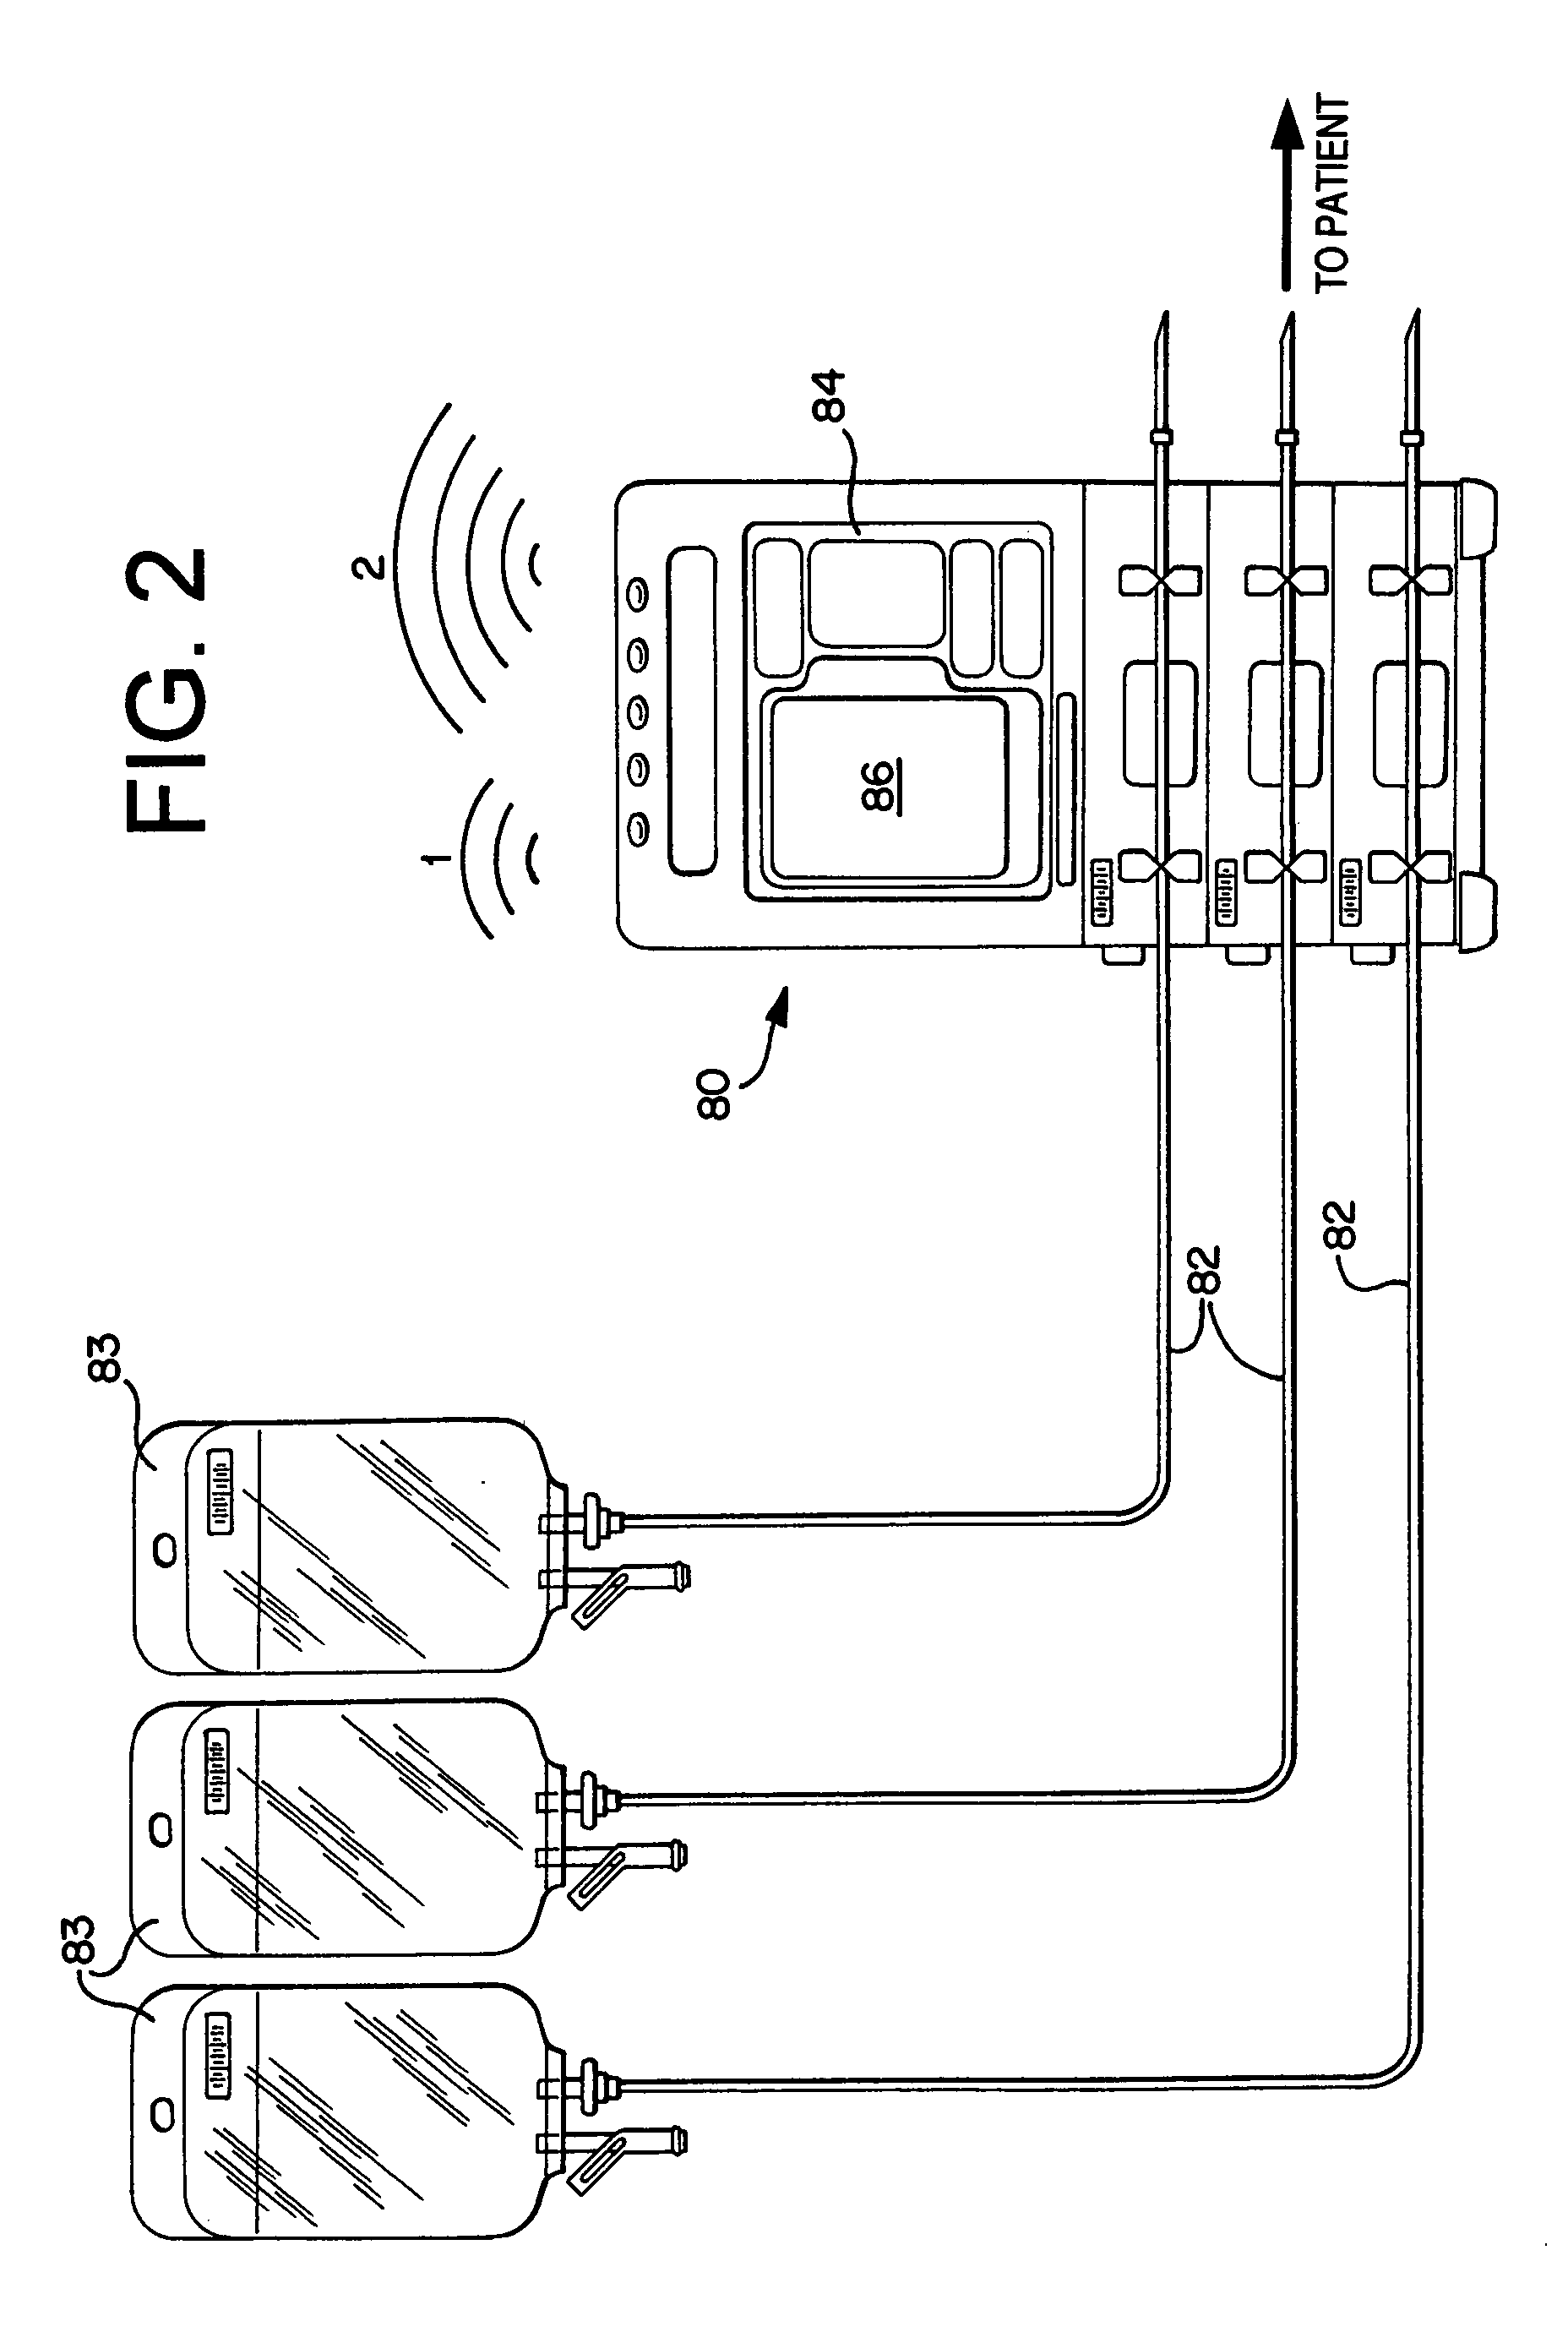 Multi-state alarm system for a medical pump